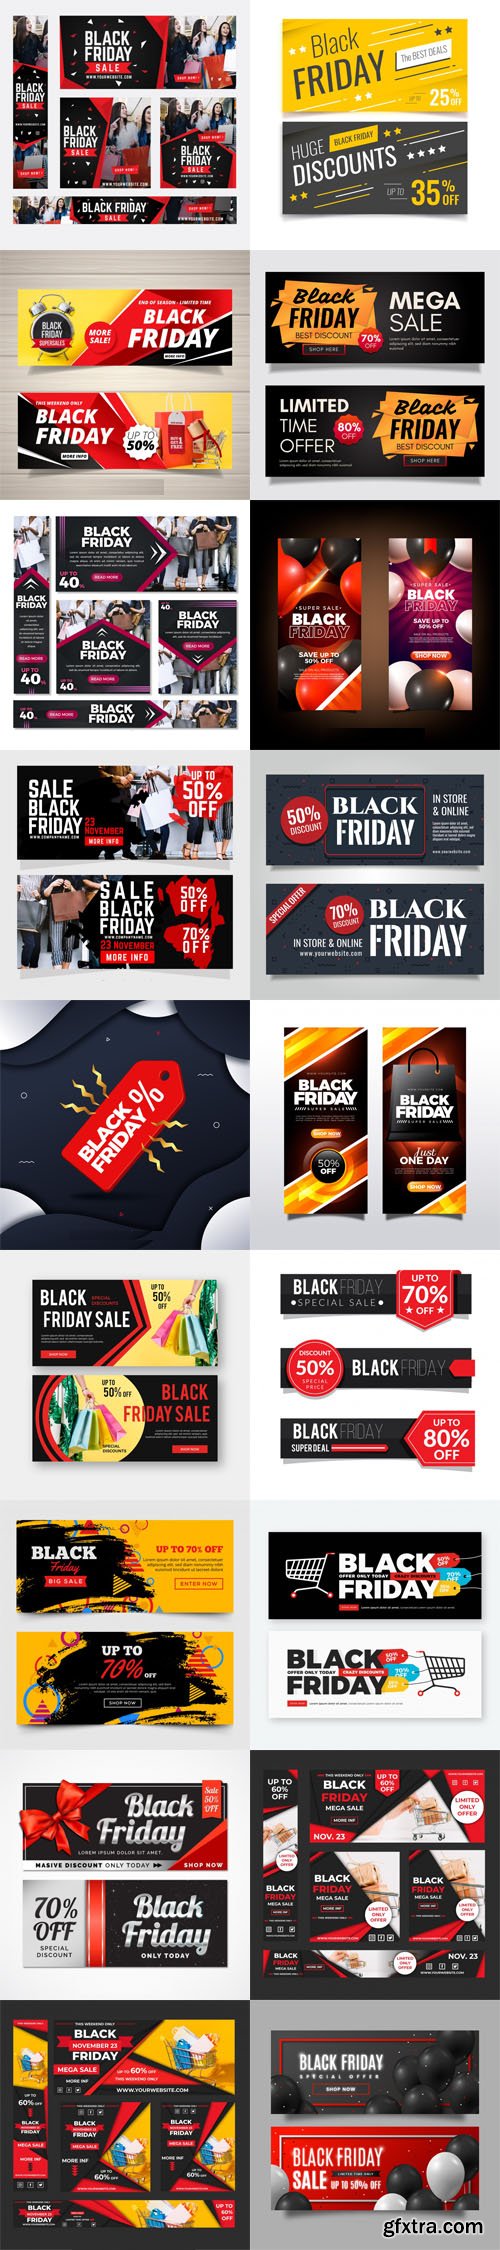 Black Friday 2019 Banners Vector Colletion Vol.2